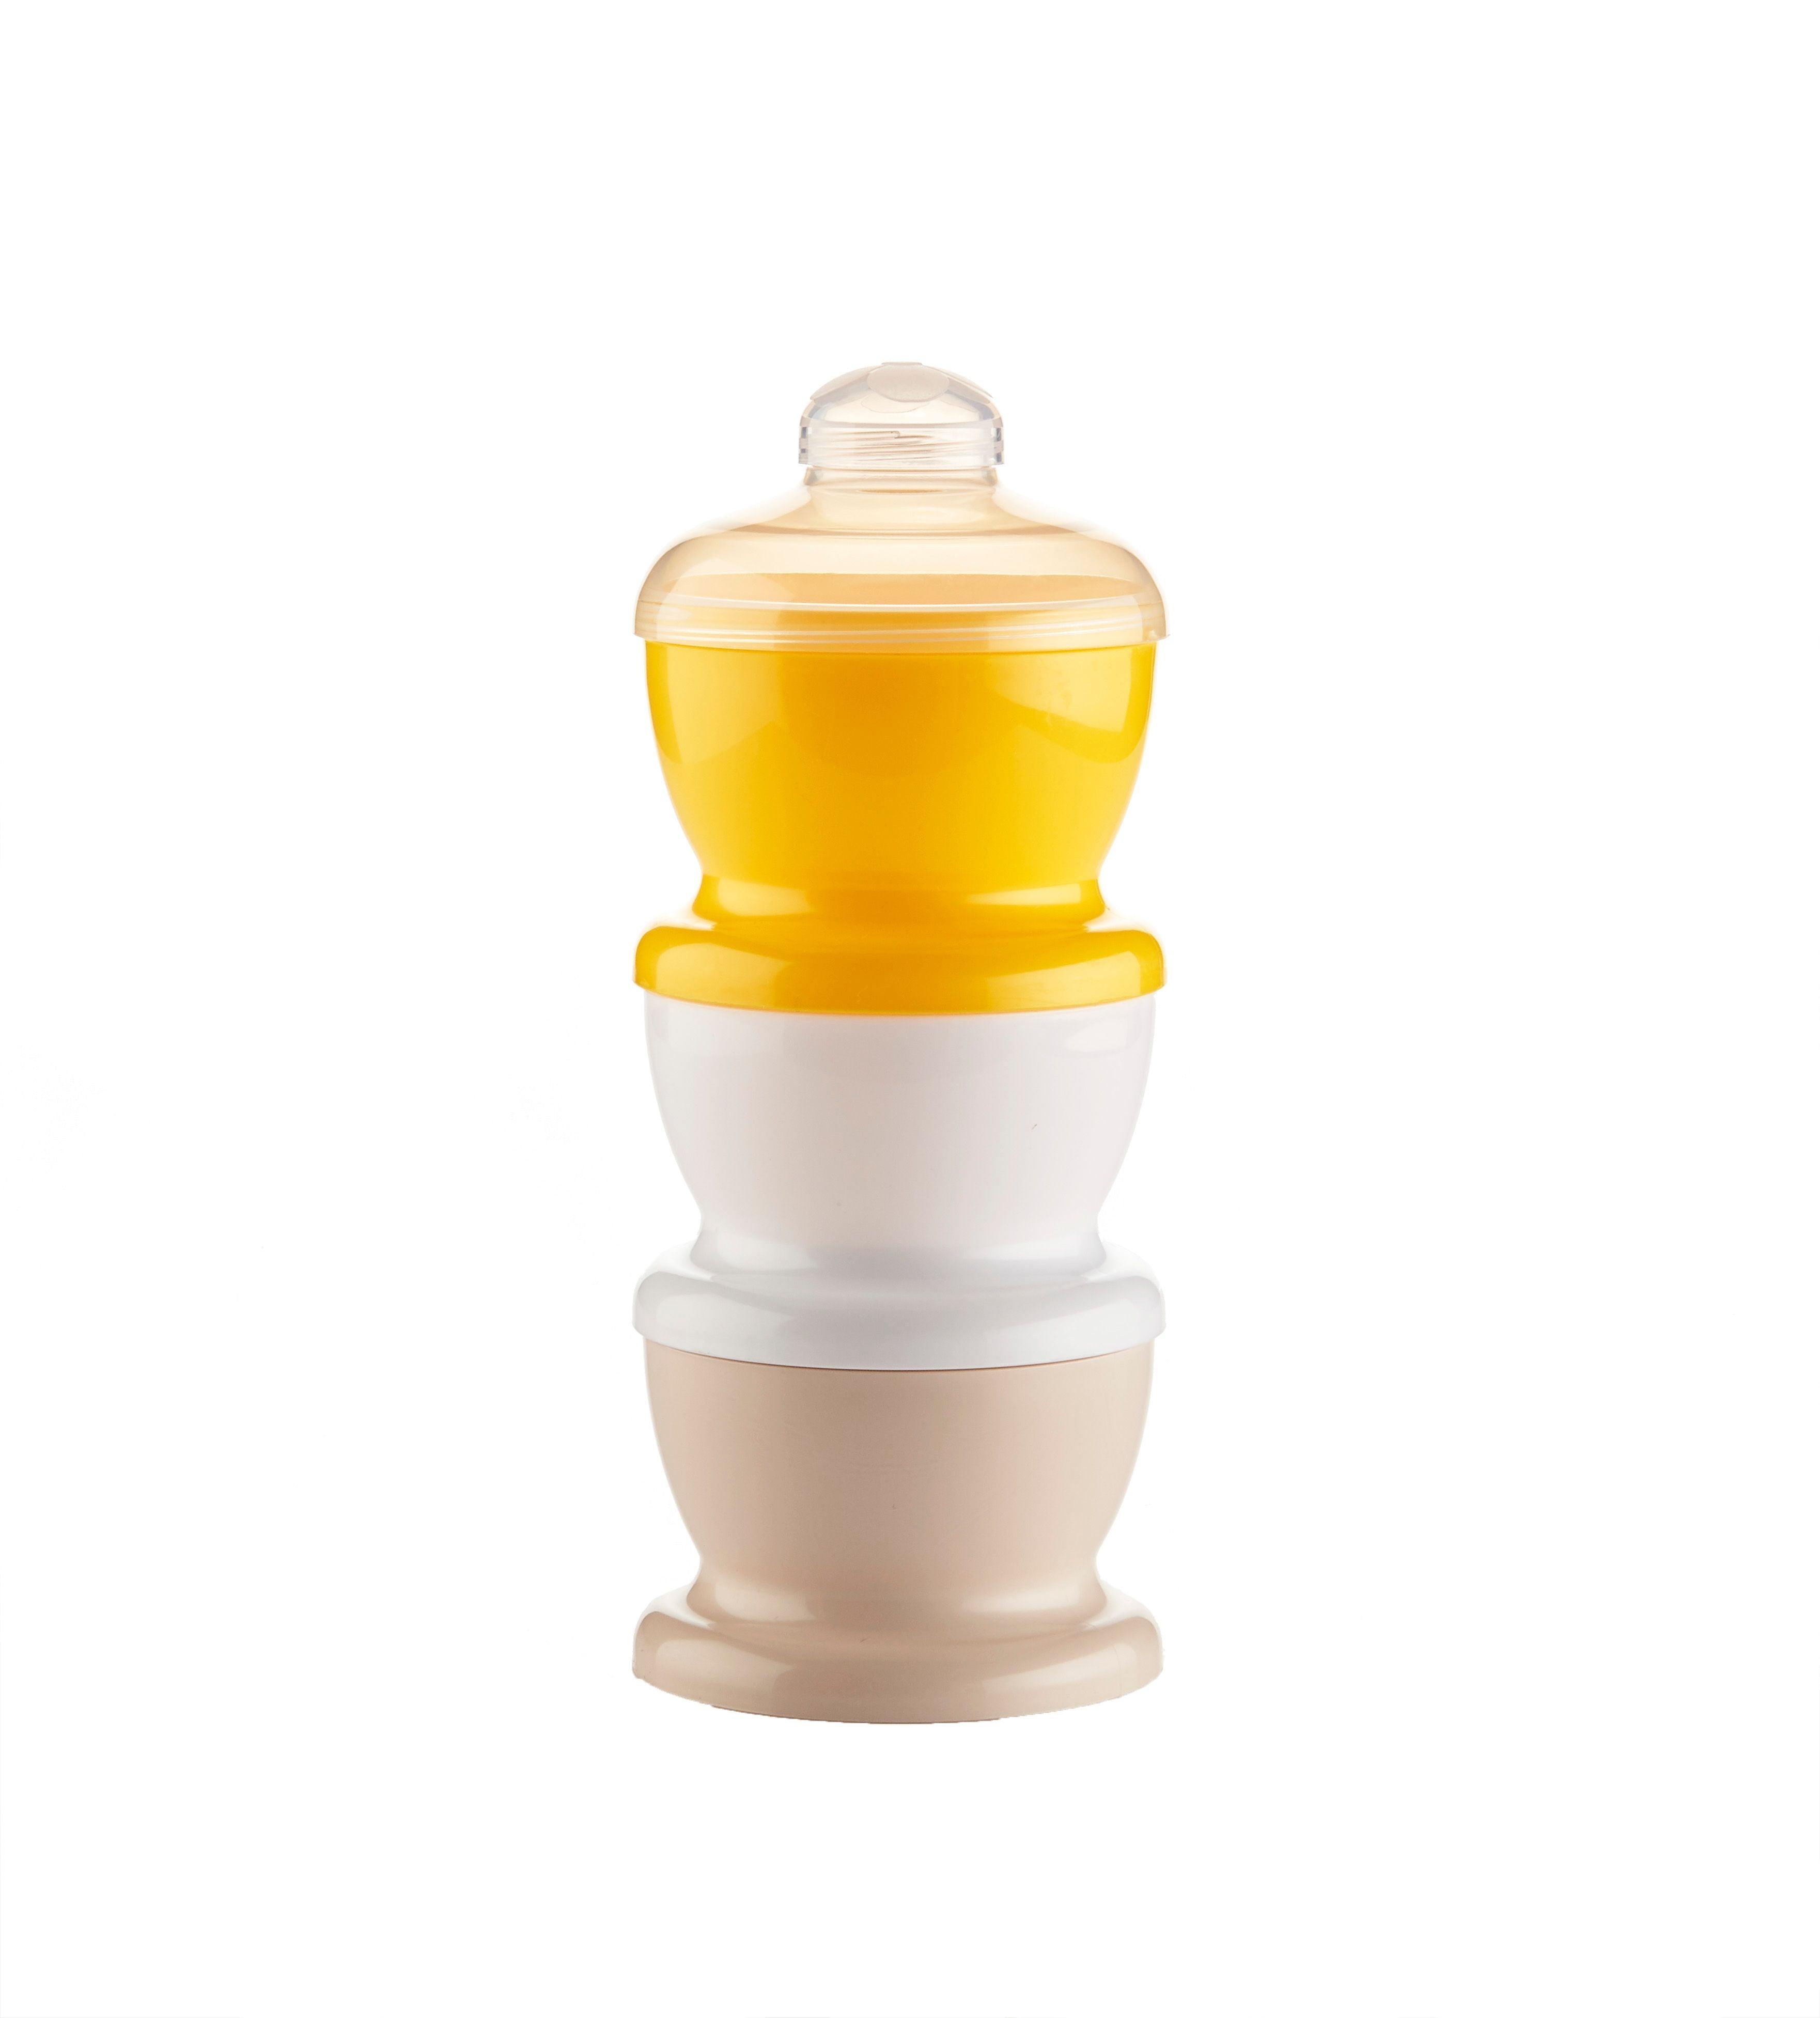 Baby Food & Milk Thermos Containers – Mari Kali Stores Cyprus